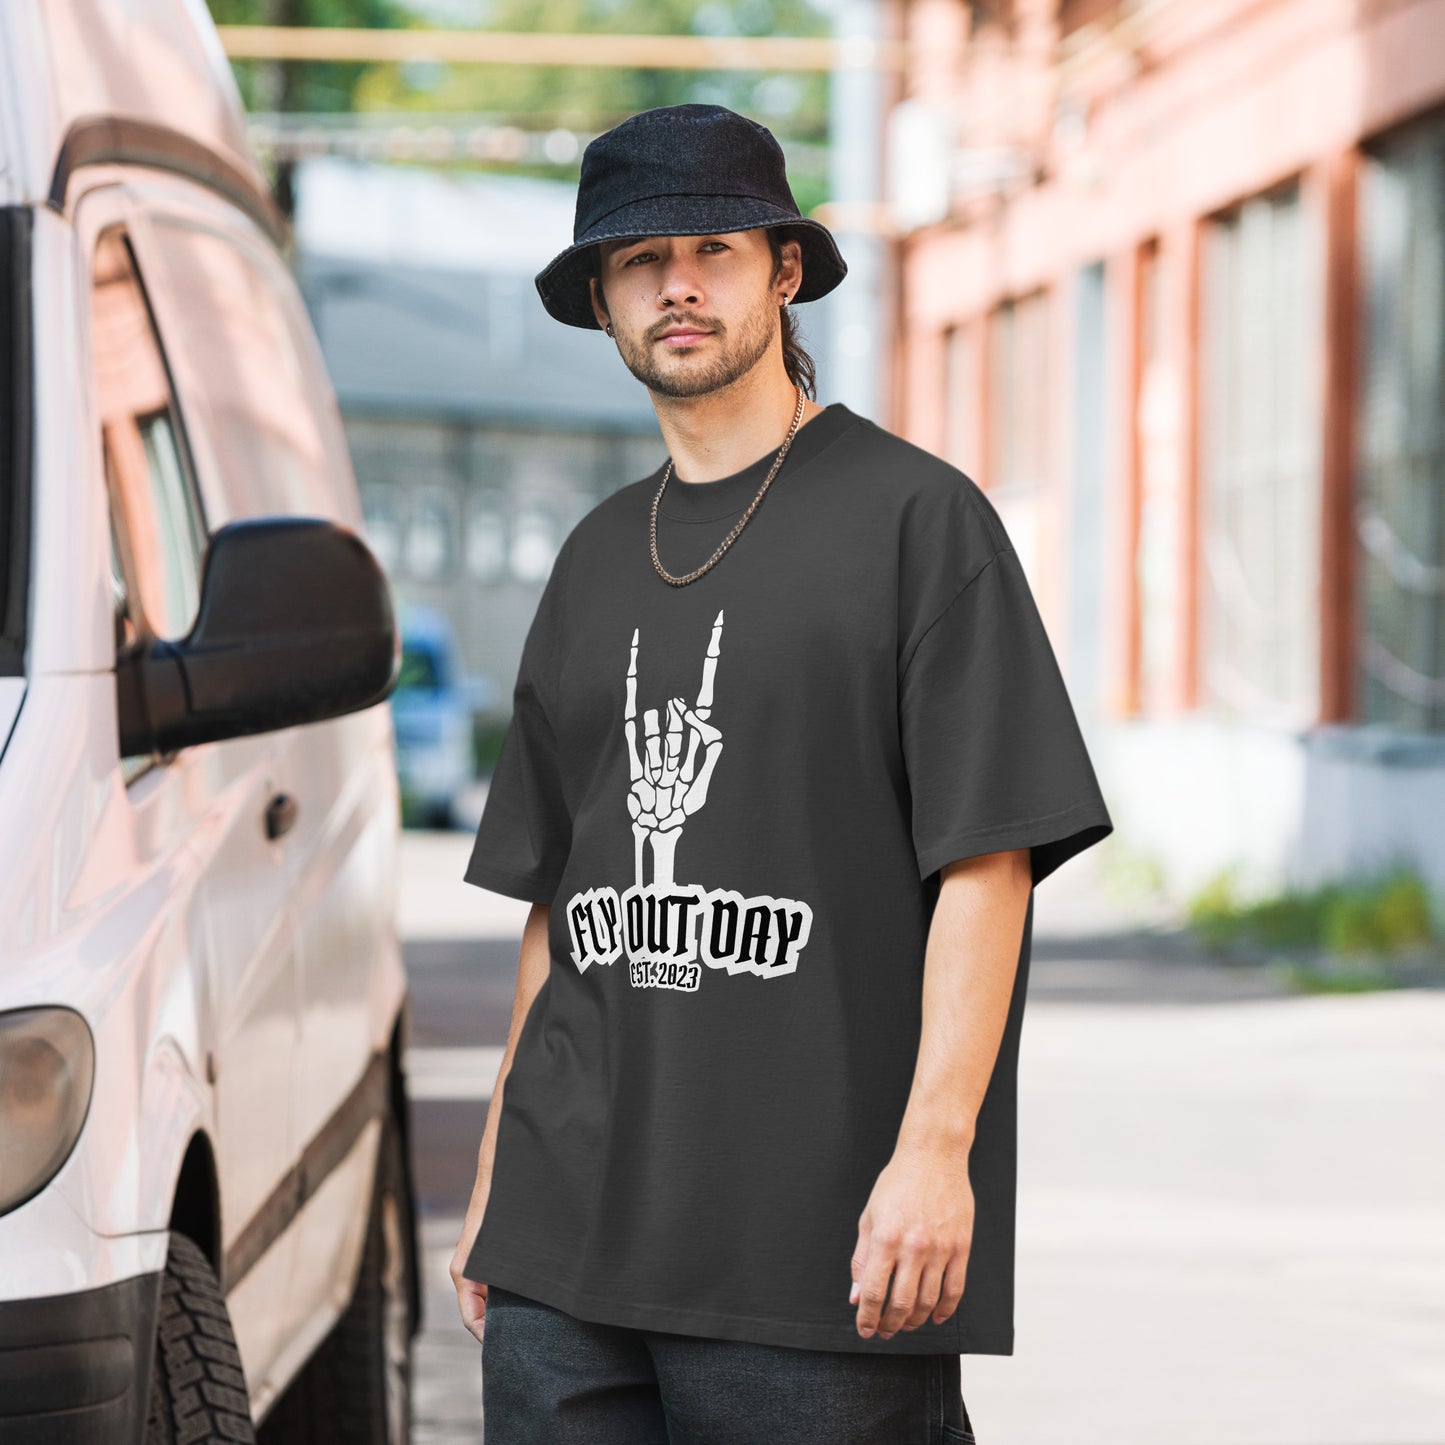 Fly Out Day - Horns Oversized T-Shirt Faded Black